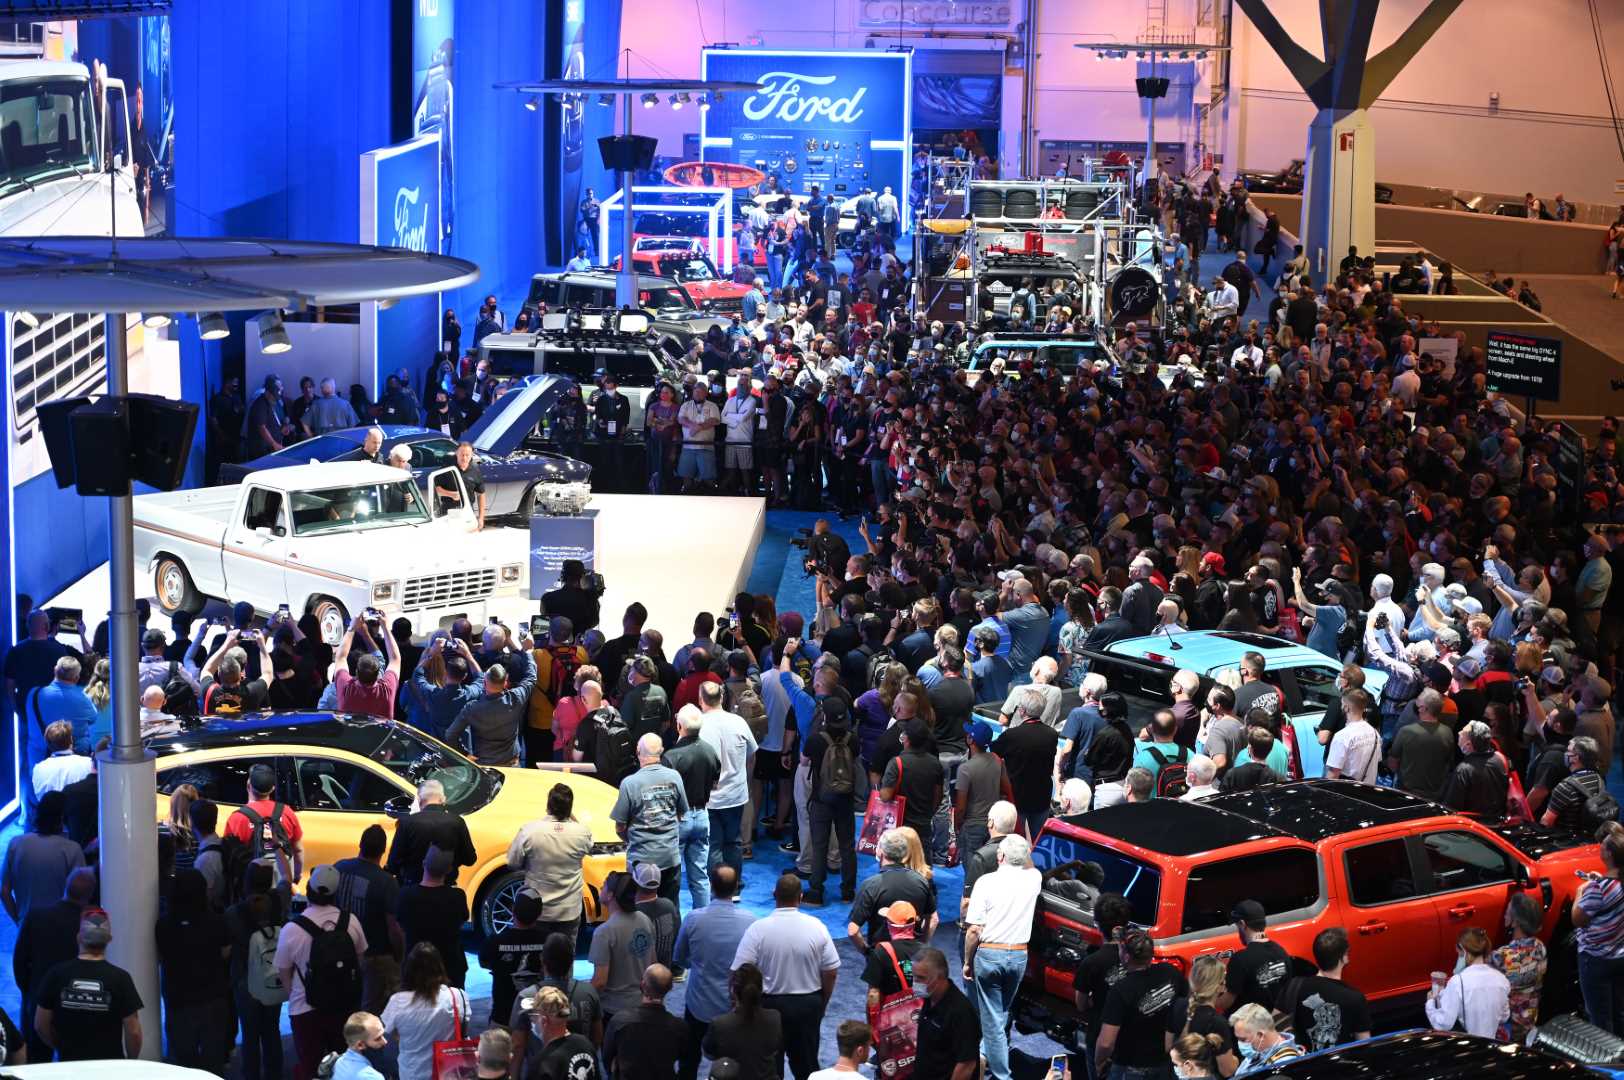 2021 SEMA SHOW CONCLUDES AS LARGEST NORTH AMERICAN AUTOMOTIVE TRADE SHOW SINCE THE PANDEMIC